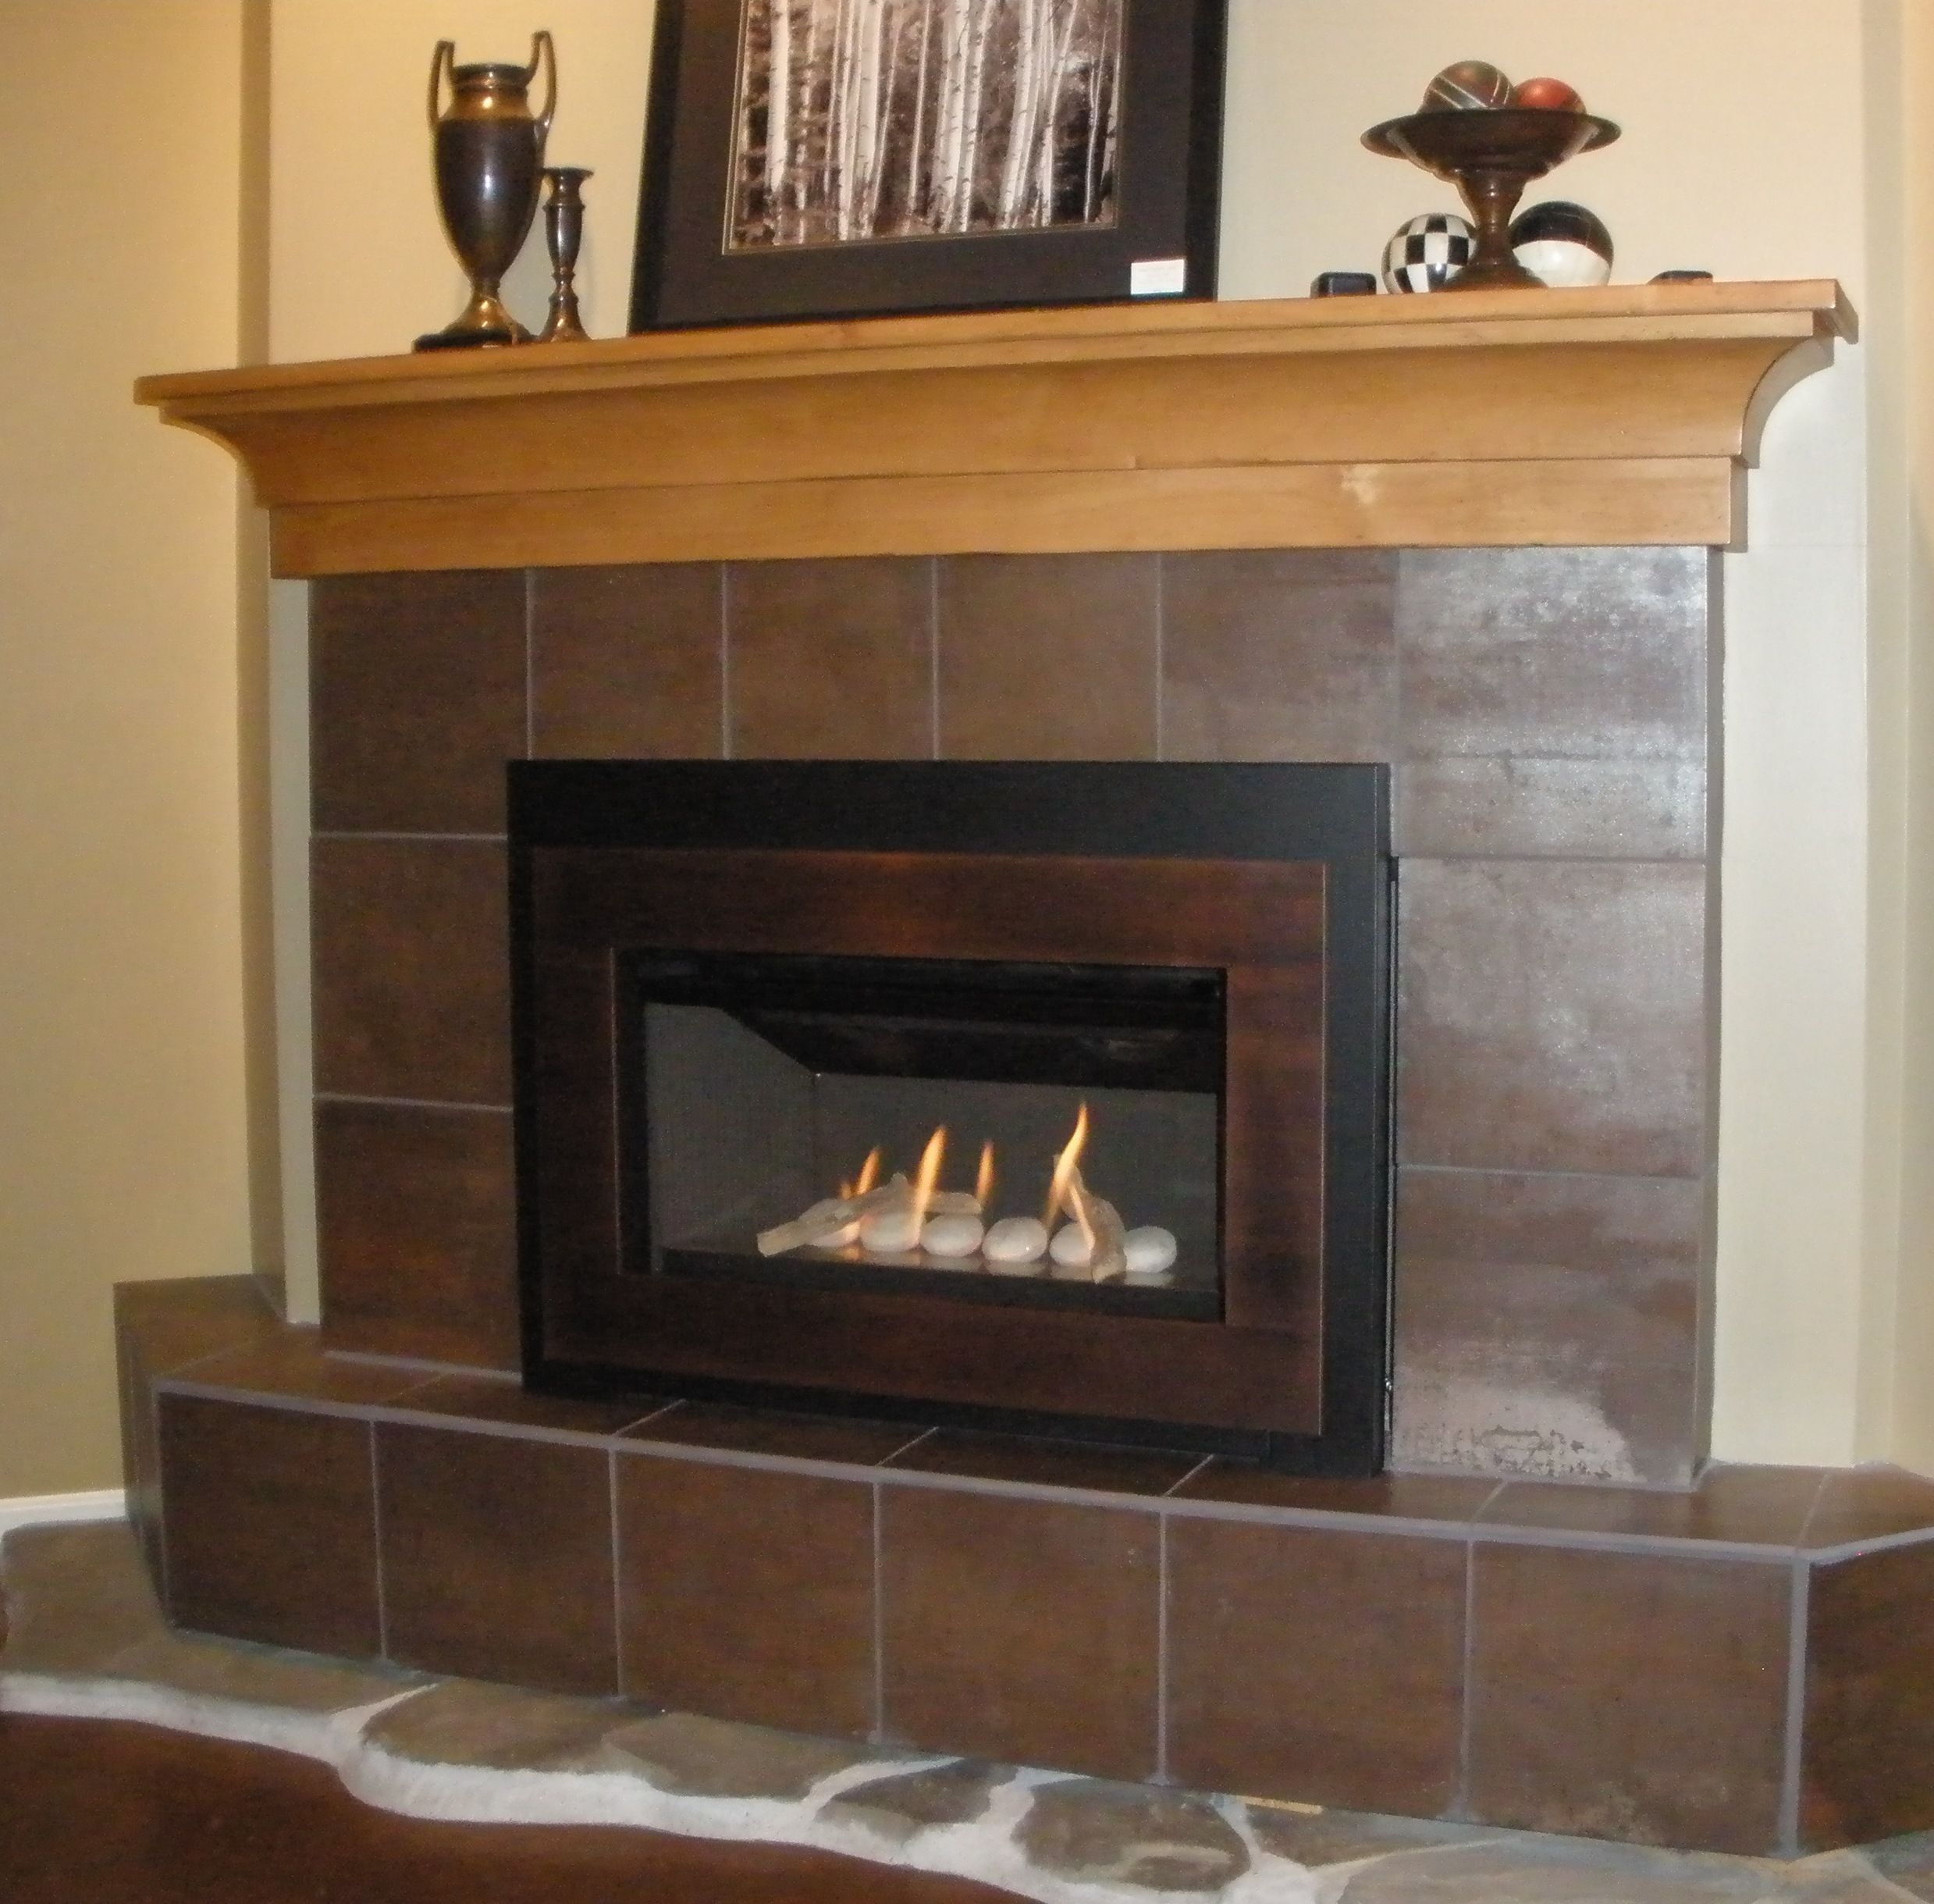 American Heritage Fireplace Best Of Pin On Valor Radiant Gas Fireplaces Midwest Dealer